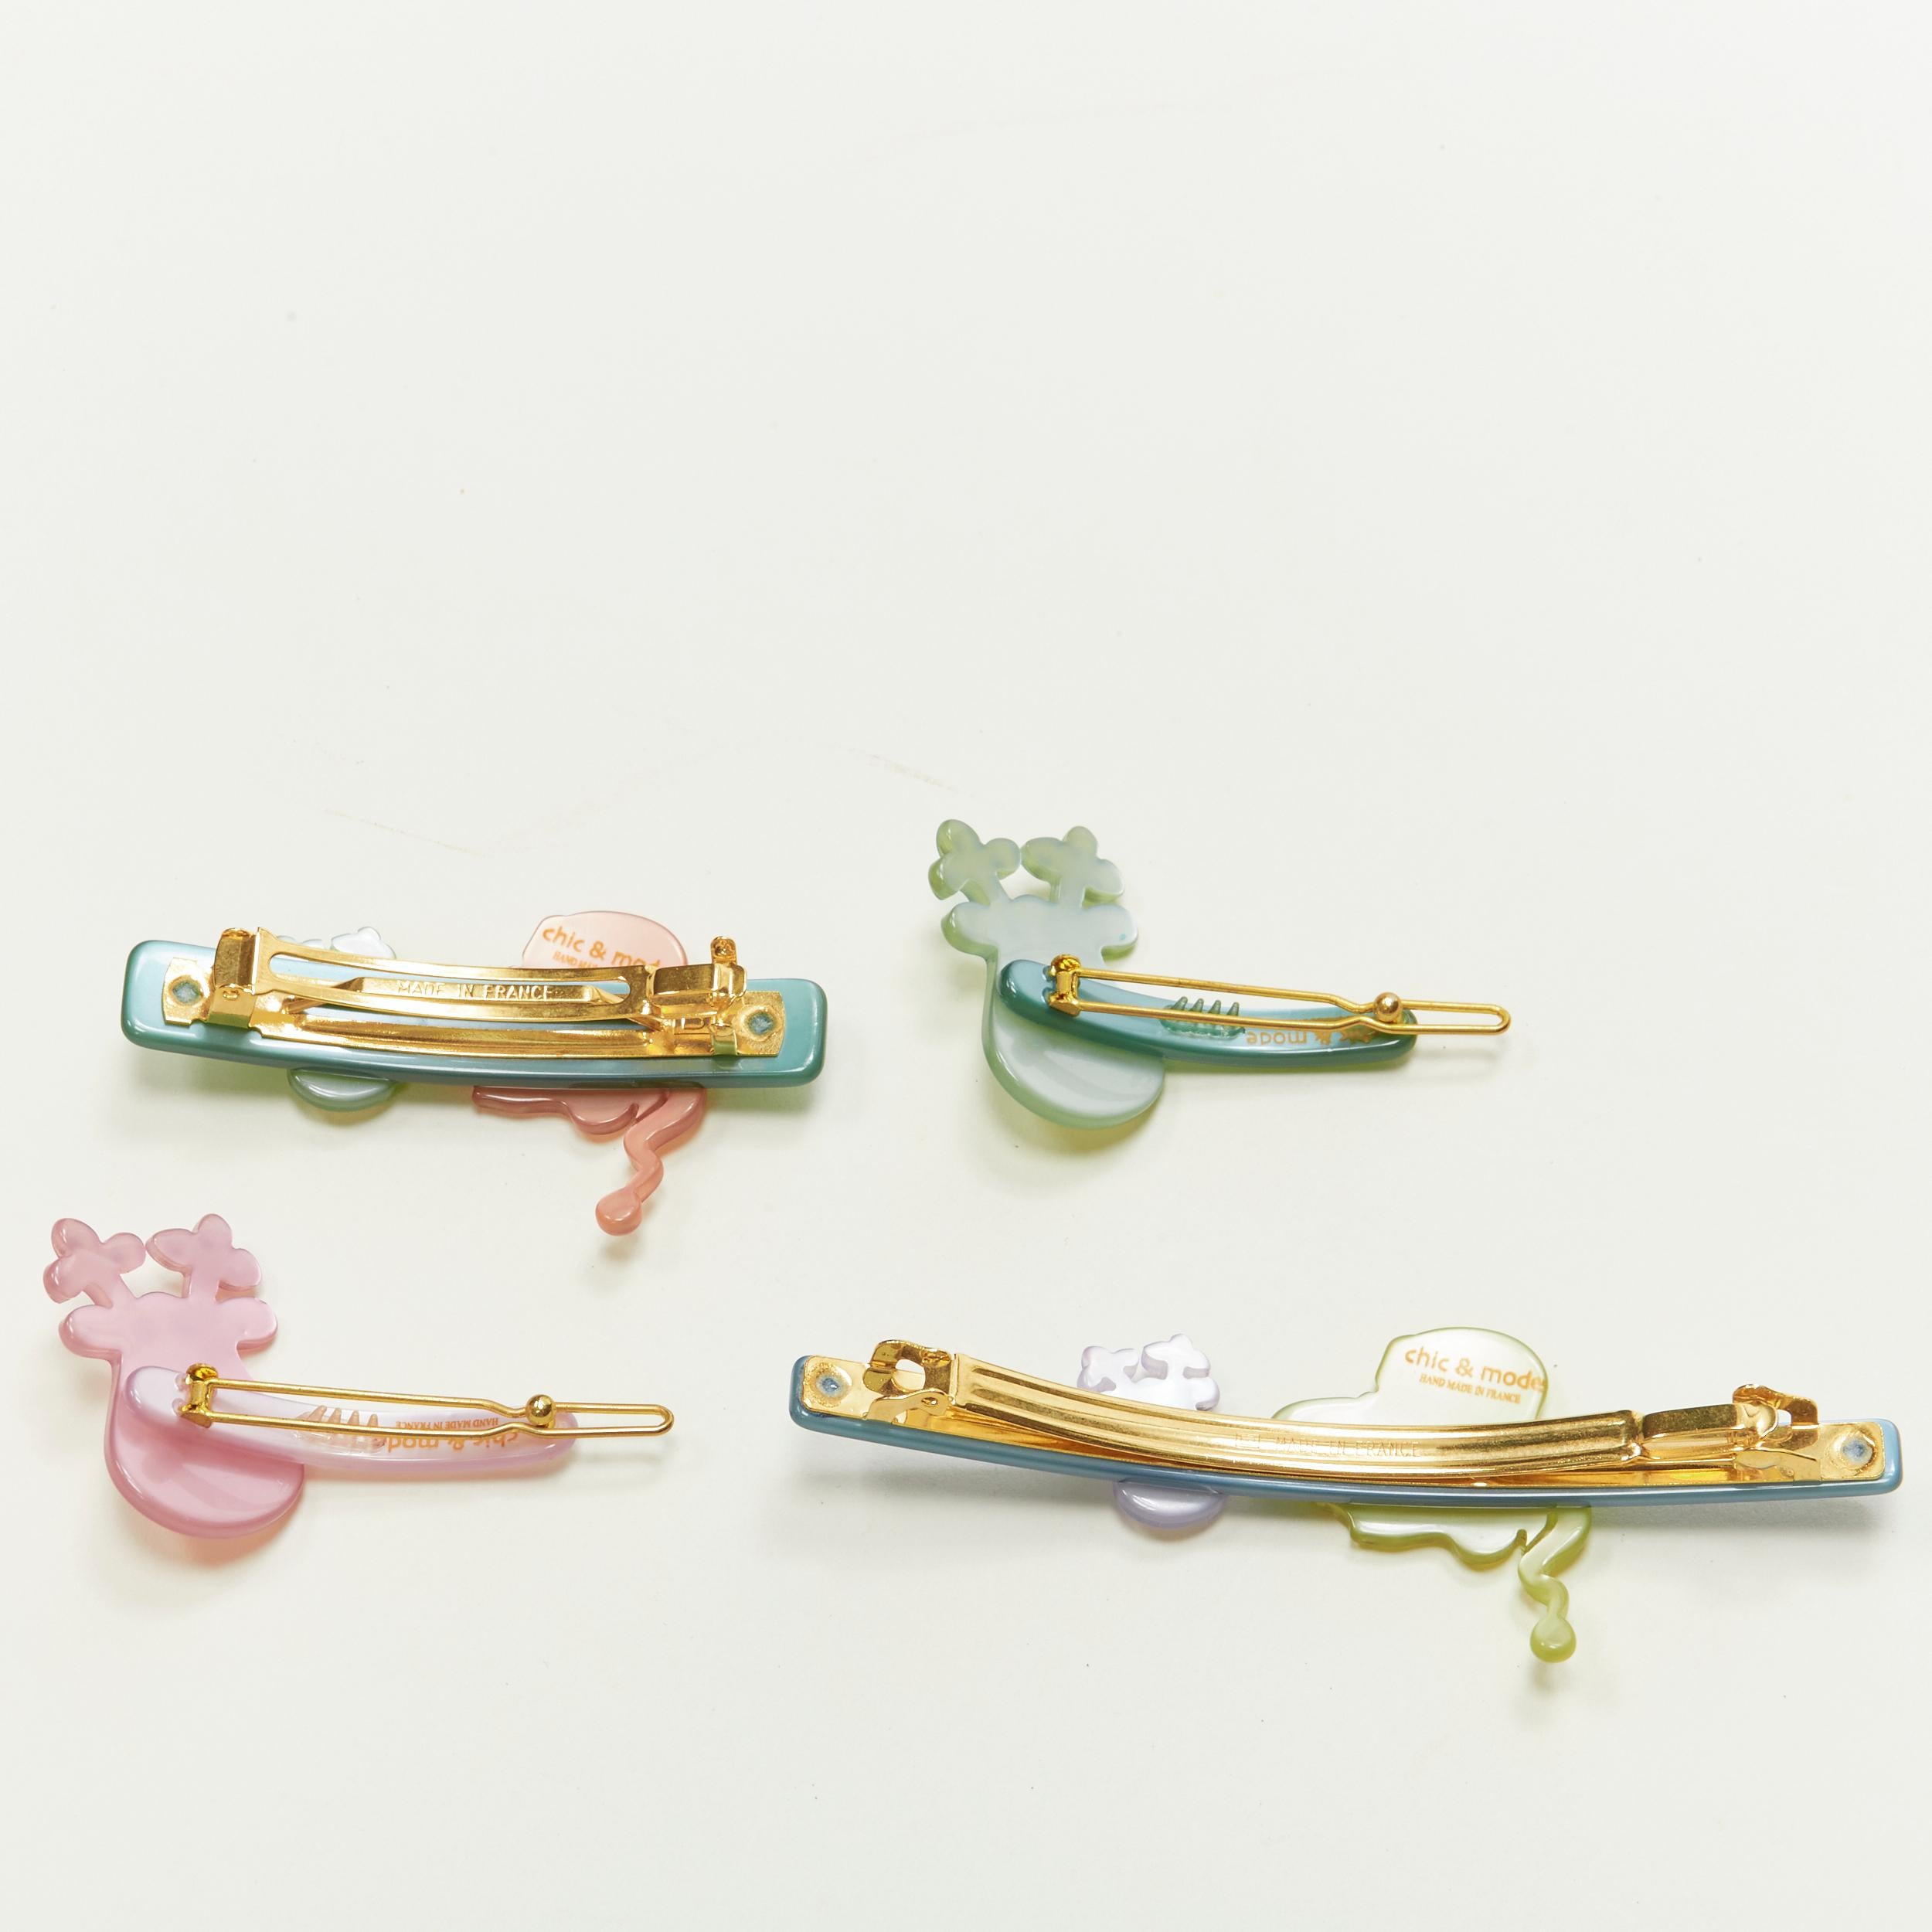 CHIC & MODE Alexandre Zouari LOT OF 4 Santa reindeer crystal acrylic hair band 
Reference: ANWU/A00239 
Brand: Chic and Mode 
Designer: Alexandre Zouari 
Material: Plastic 
Color: Green 
Pattern: Solid 
Extra Detail: 2 clasp clip. 2 mini pin clip.